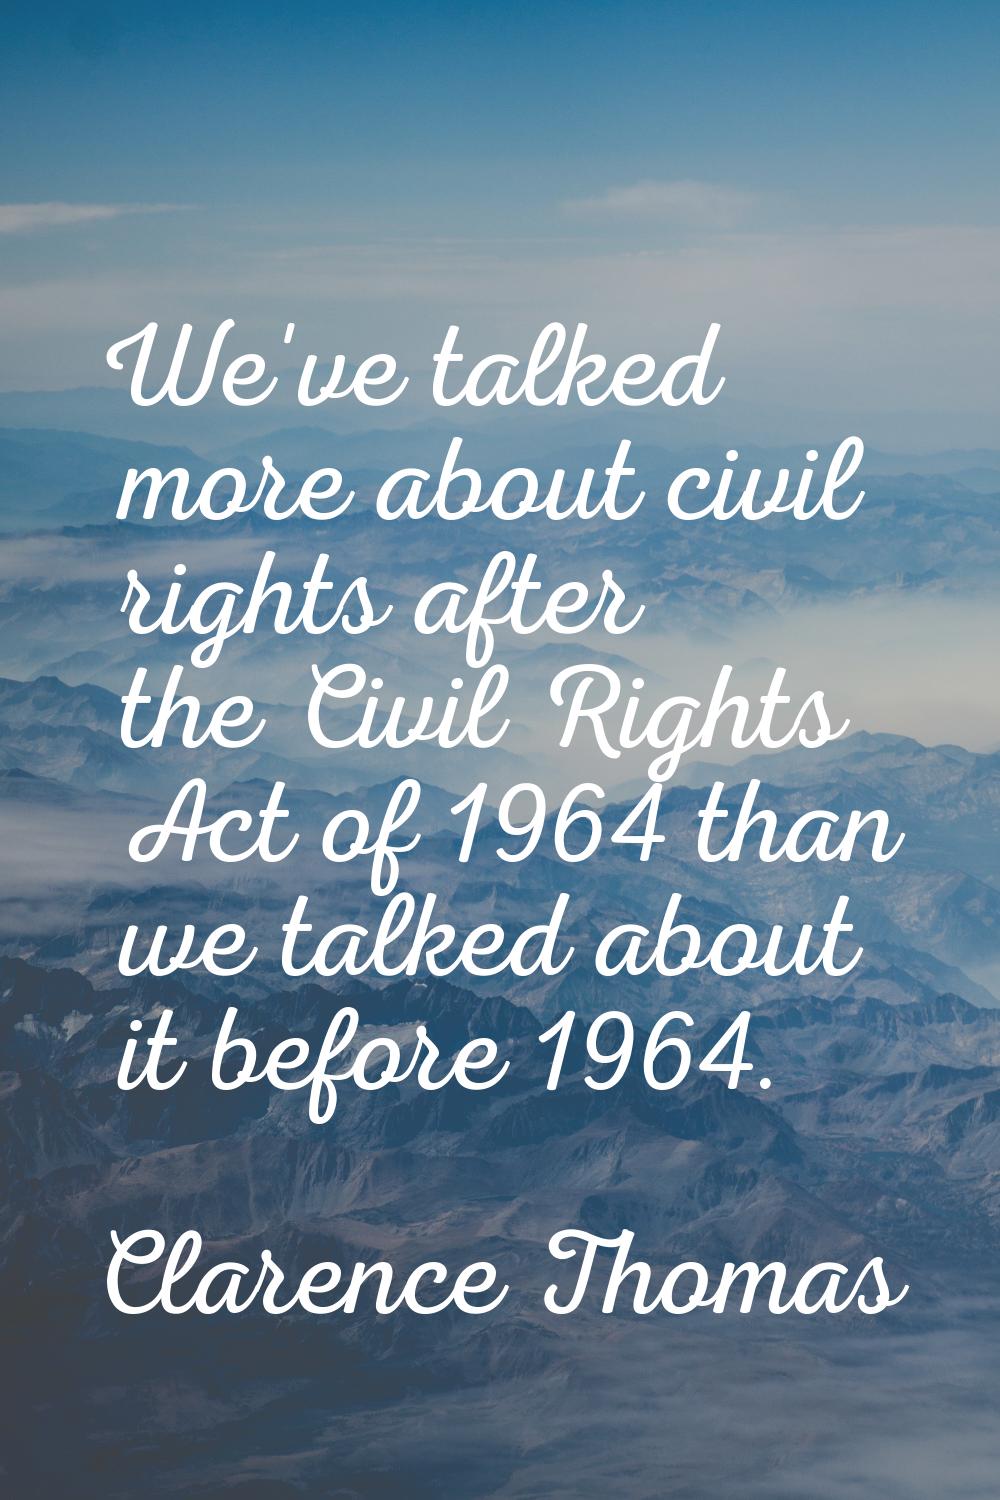 We've talked more about civil rights after the Civil Rights Act of 1964 than we talked about it bef